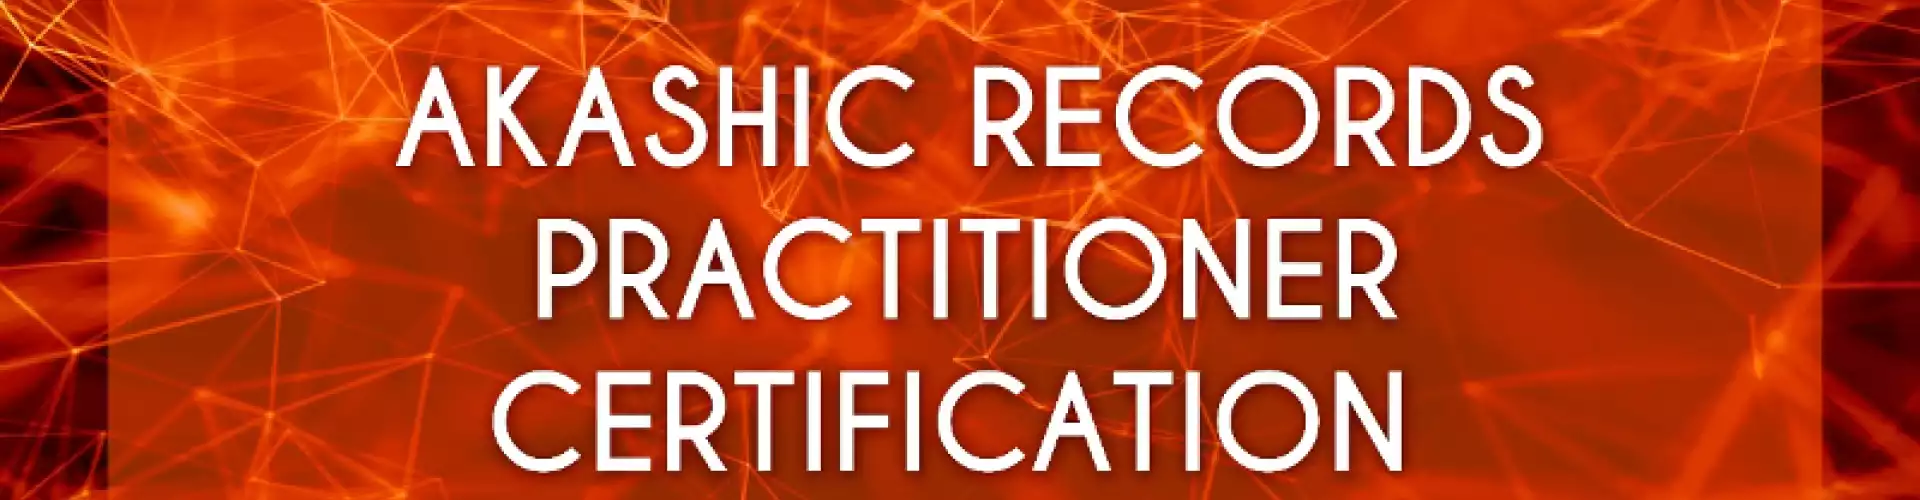 Akashic Records Practitioner Certification - July 31, 2020 - Amy Mak